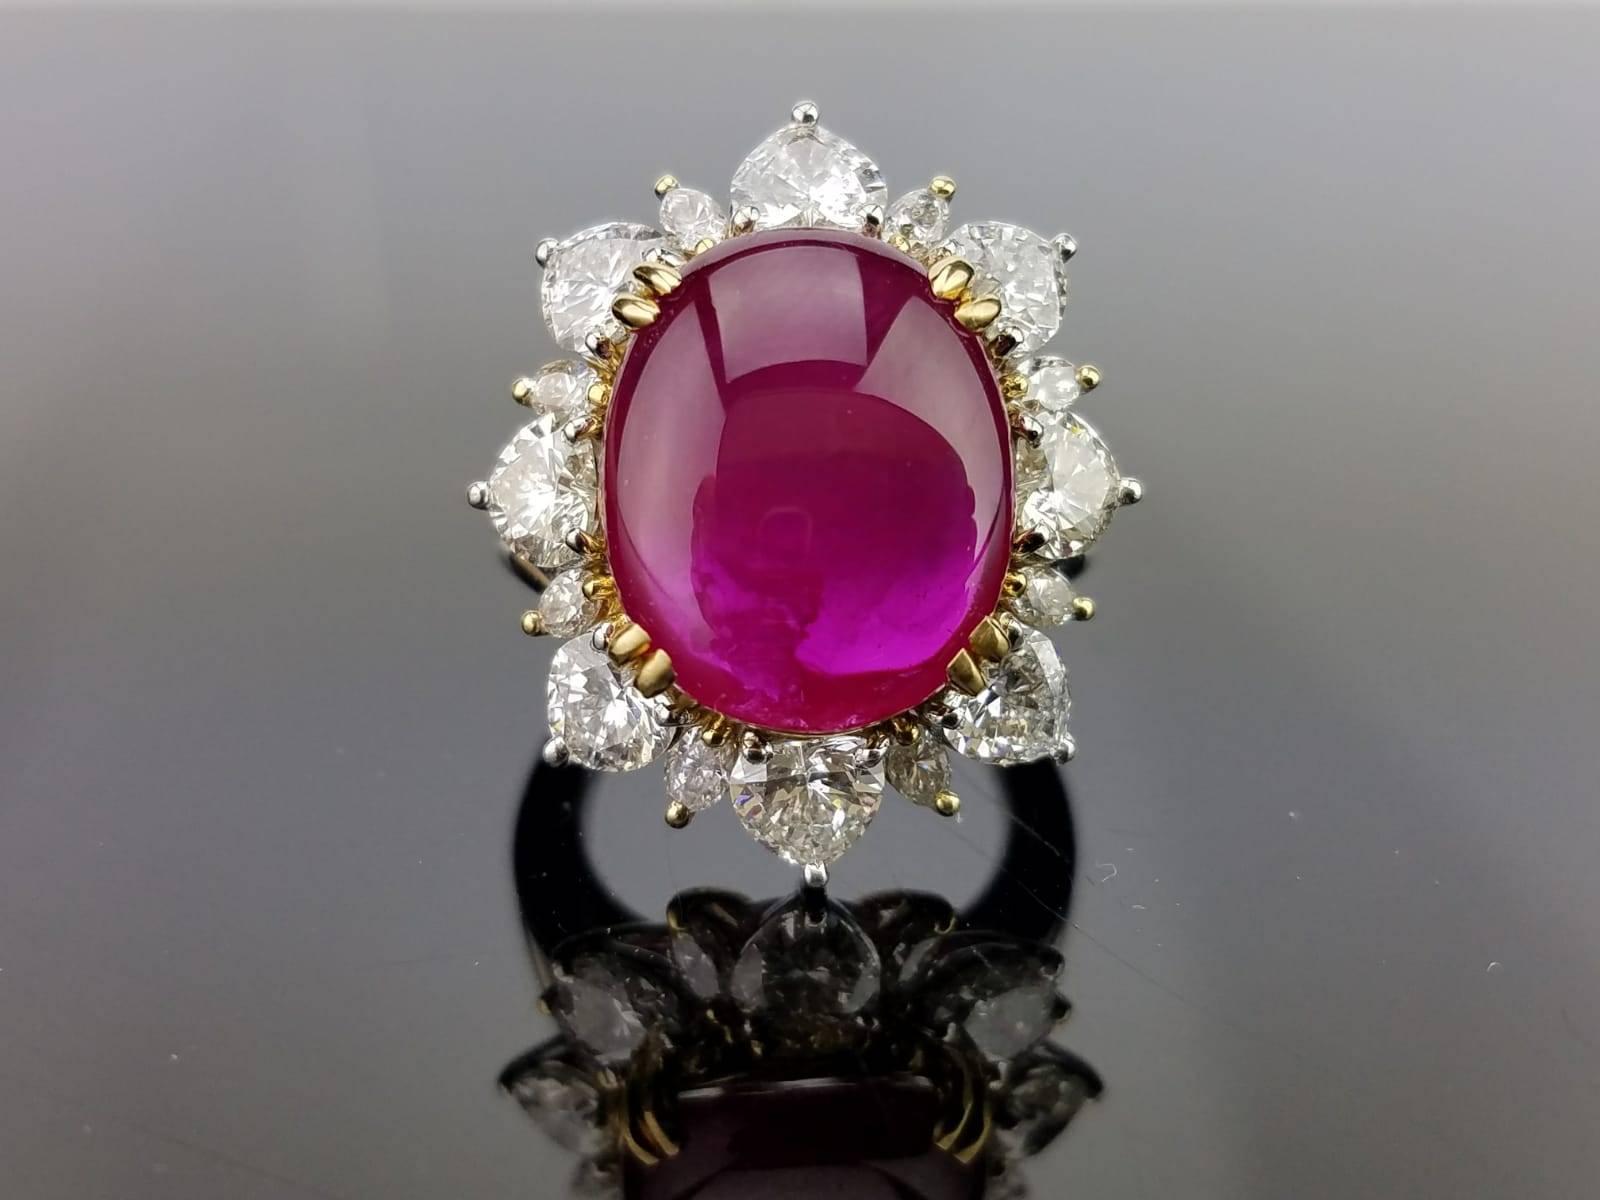 A beautiful 9.13 carat Burmese Ruby opaque cabochon, sorrounded by 2.55 carats of heart shape Diamonds, all set in platinum.

Stone Details: 
Stone: Burmese Ruby
Carat Weight: 9.13 Carats

Diamond Details: 
Total Carat Weight: 2.55 carat
Quality: VS